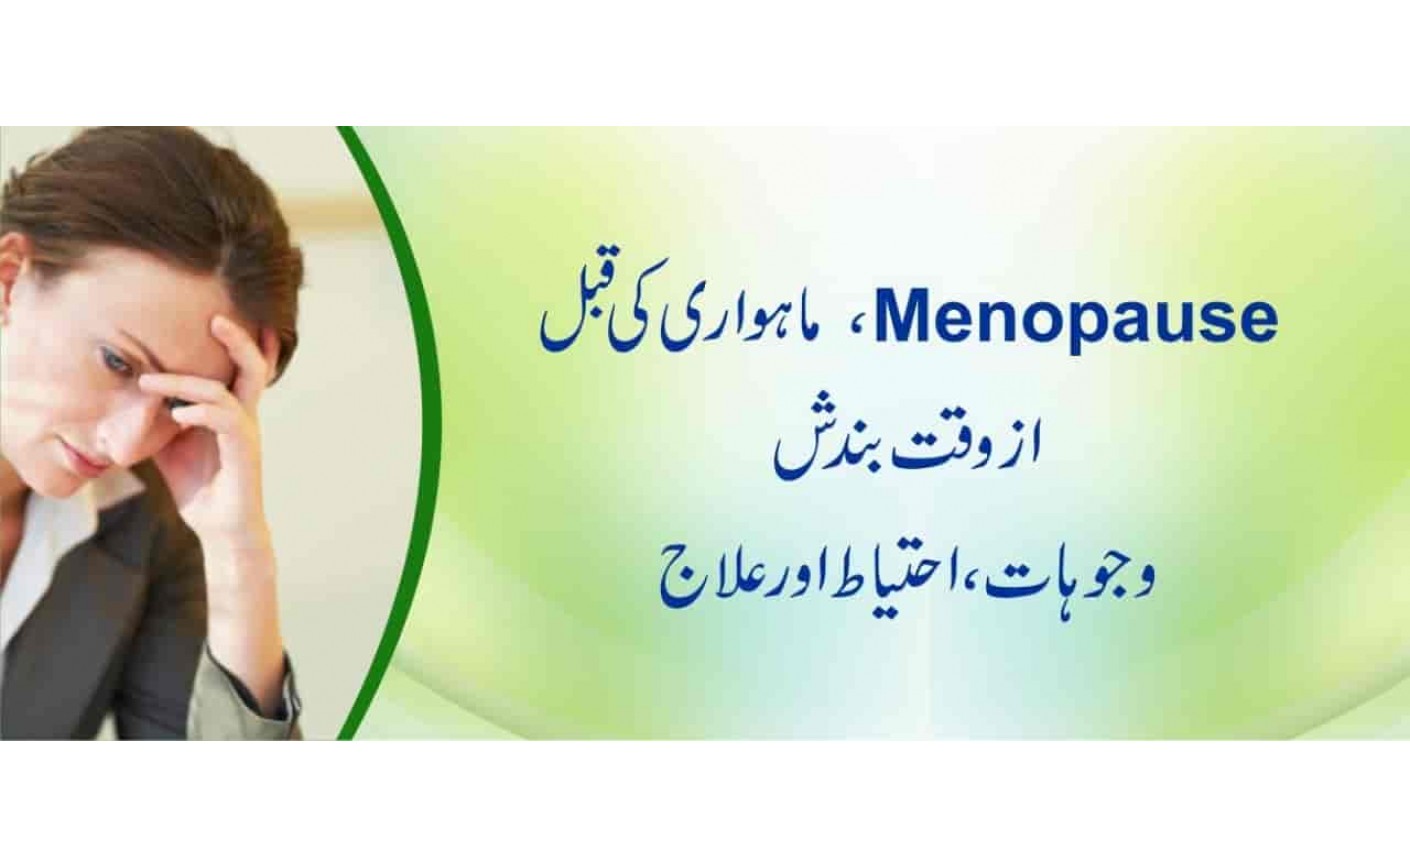 What is menopause?